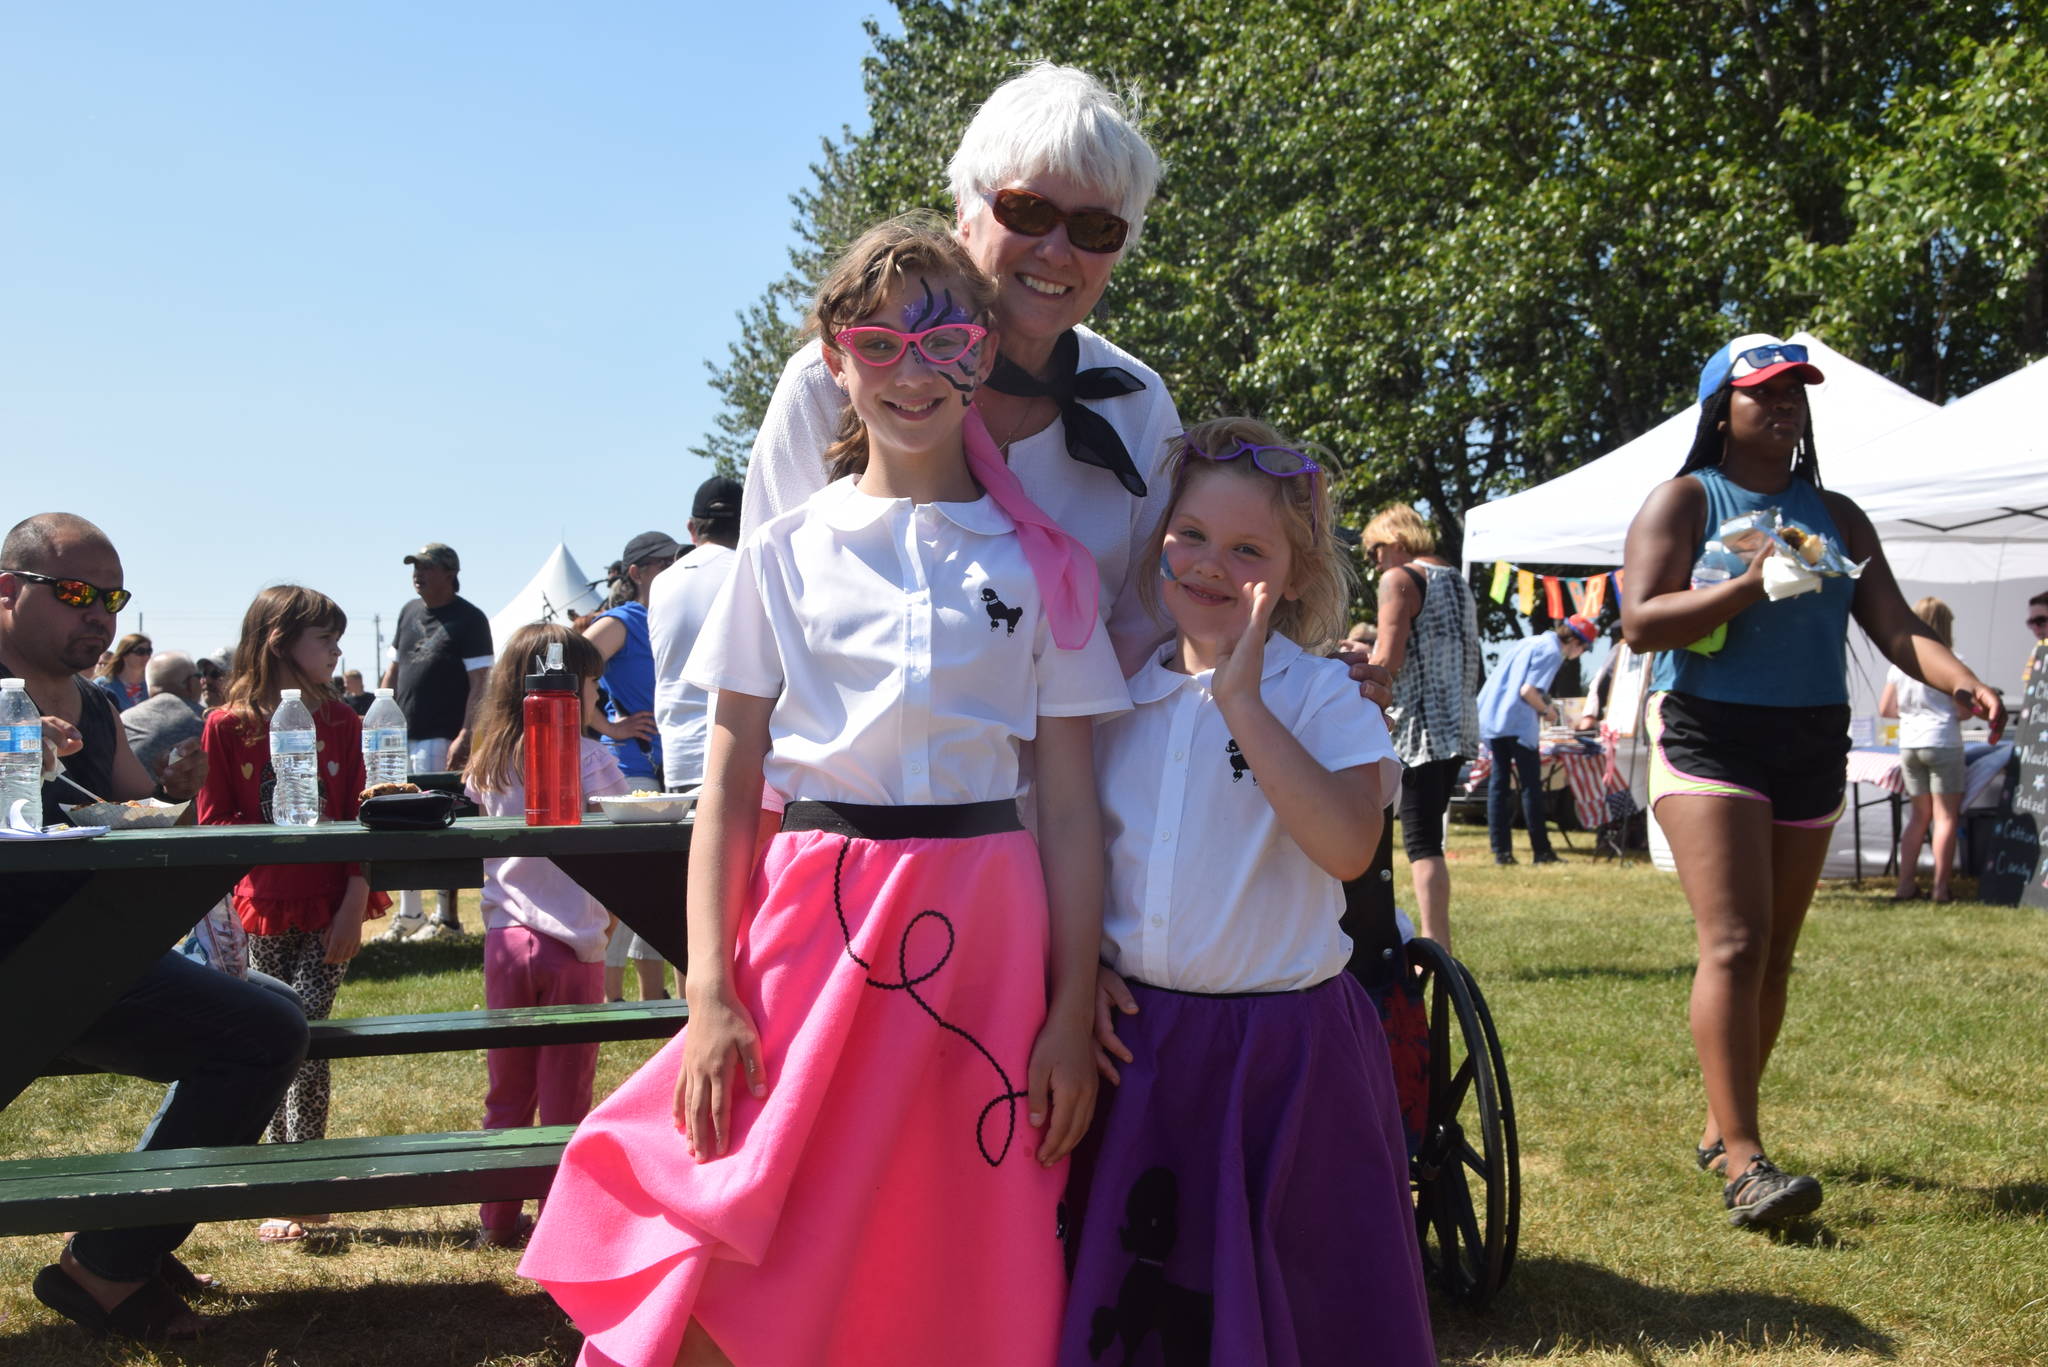 Dorothy Gray and her granddaughters Leah and Eileen Arness smile for the camera at the Kenai Park Strip during the July 4th parade in Kenai, Alaska. (Photo by Brian Mazurek/Peninsula Clarion)